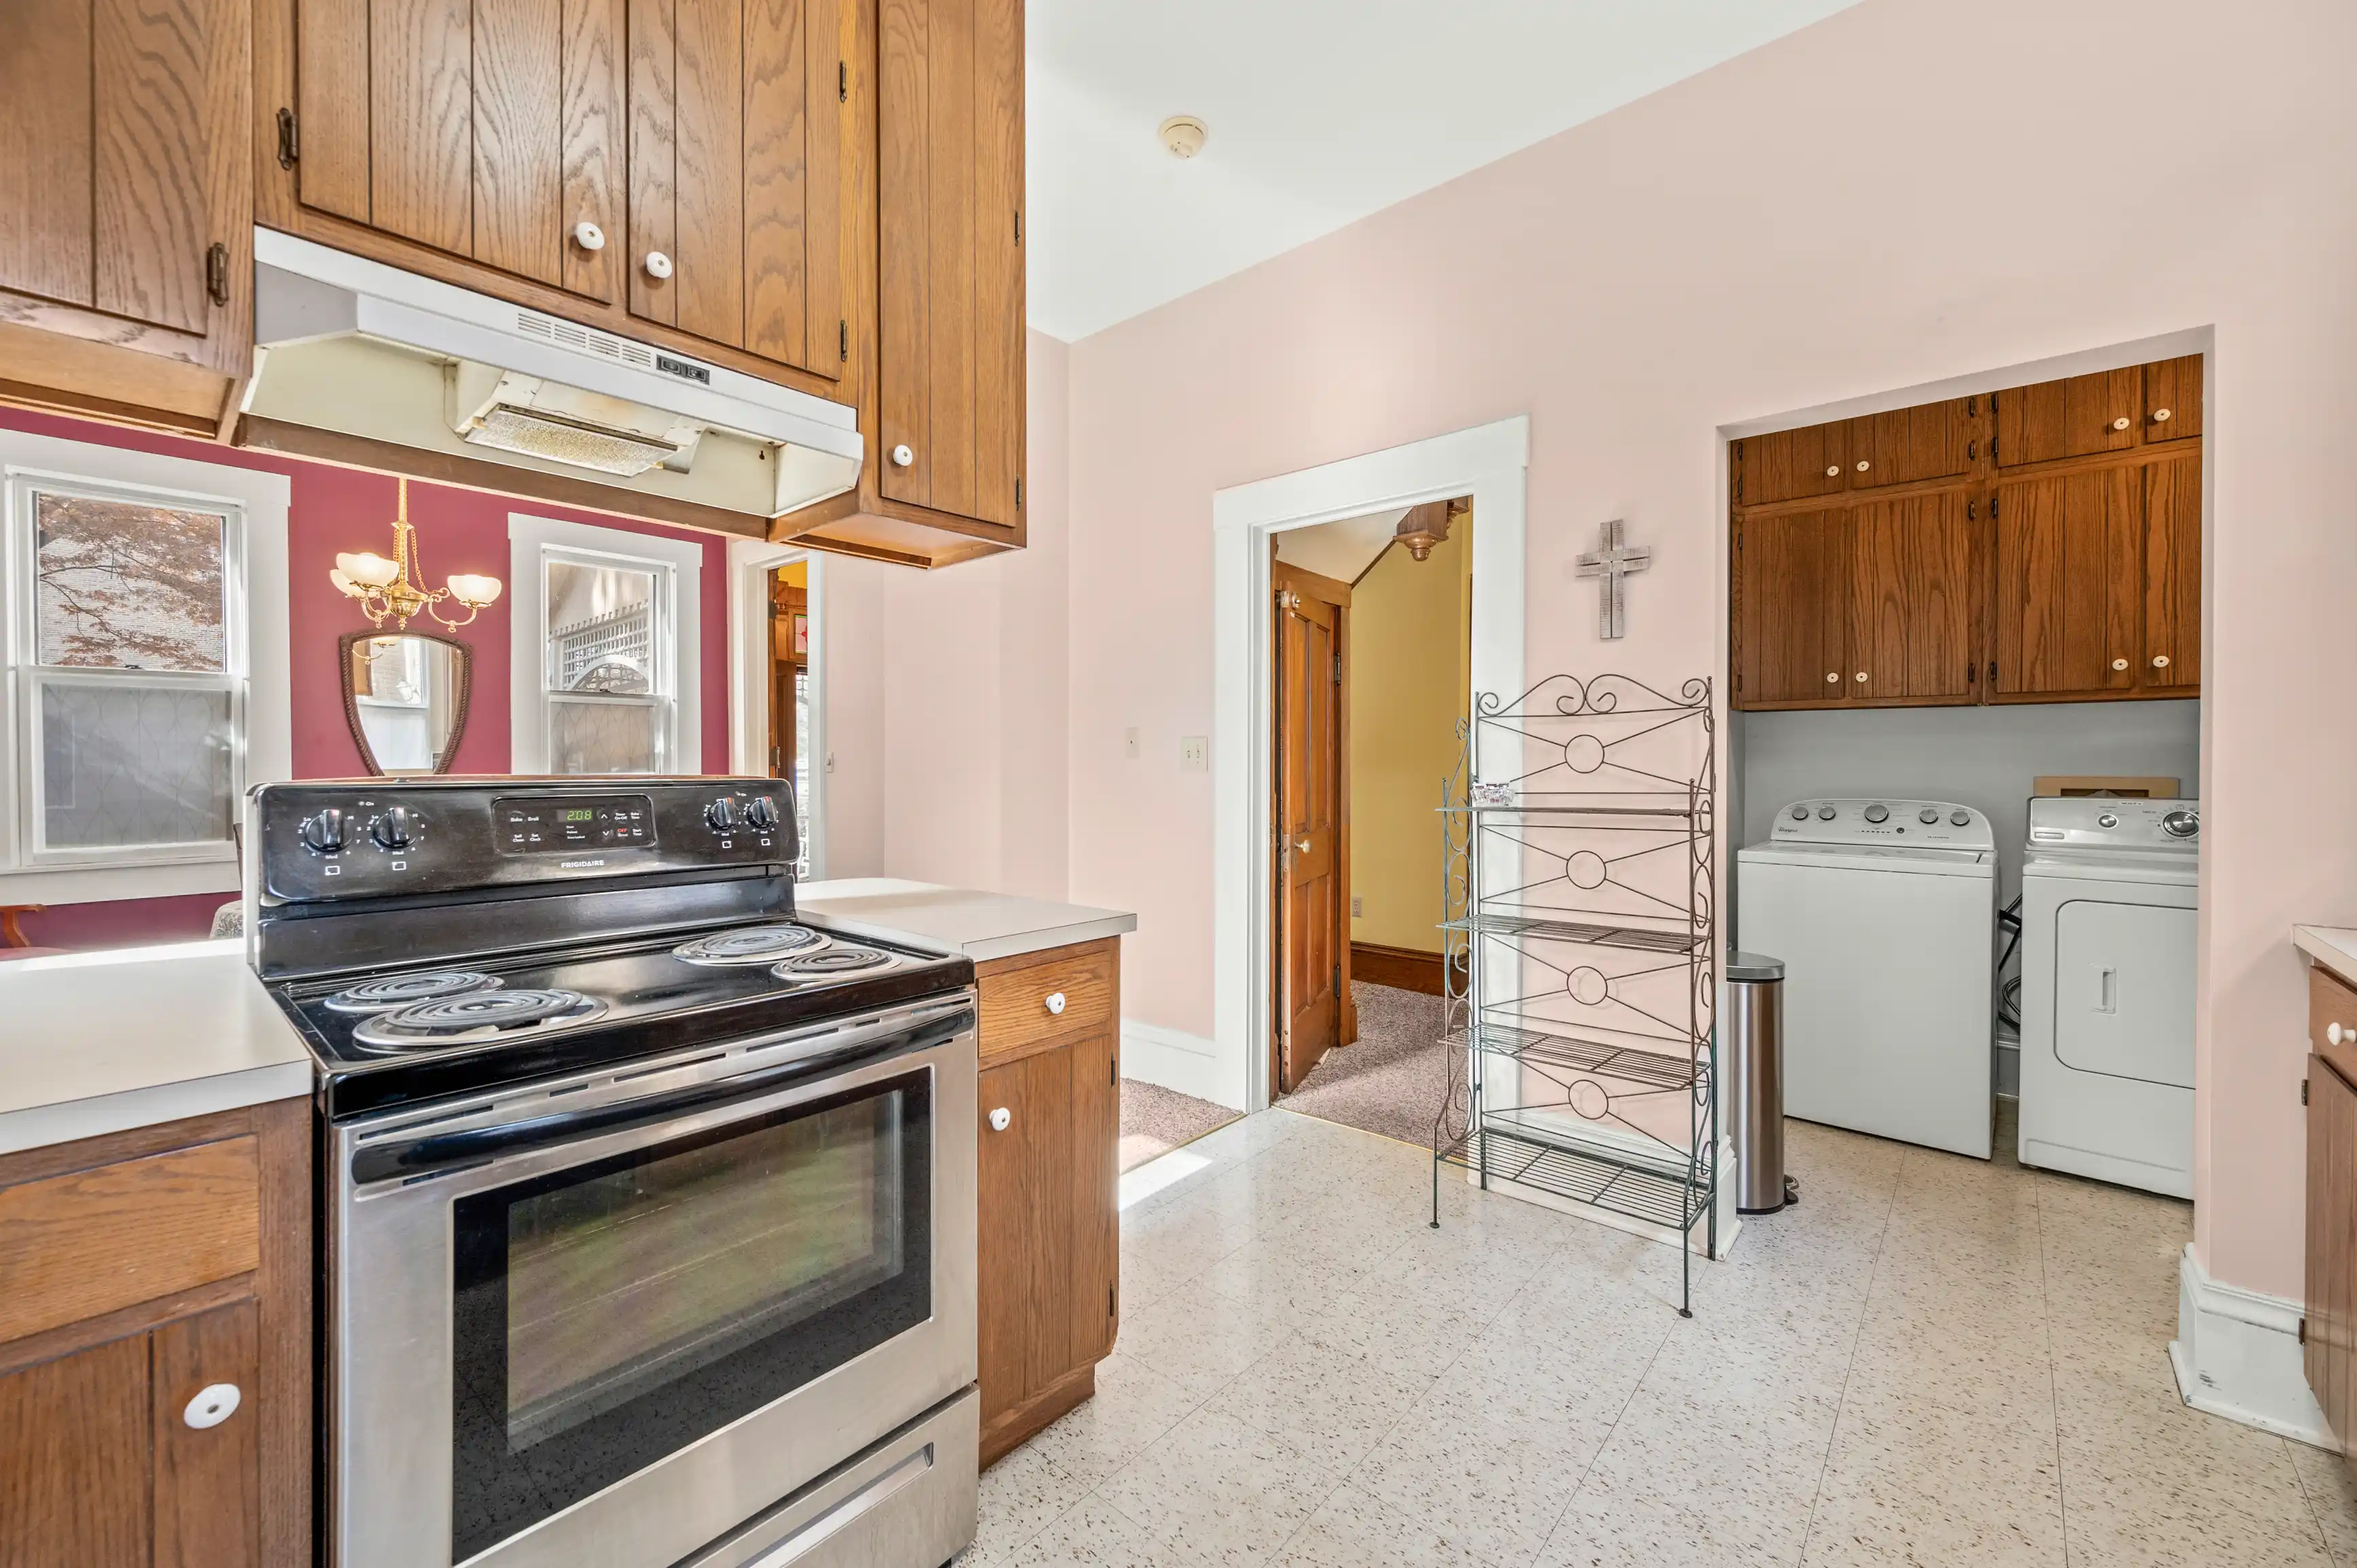 Bright kitchen interior with wooden cabinets, white appliances, and pink walls, featuring a stove, microwave, washer, and dryer.